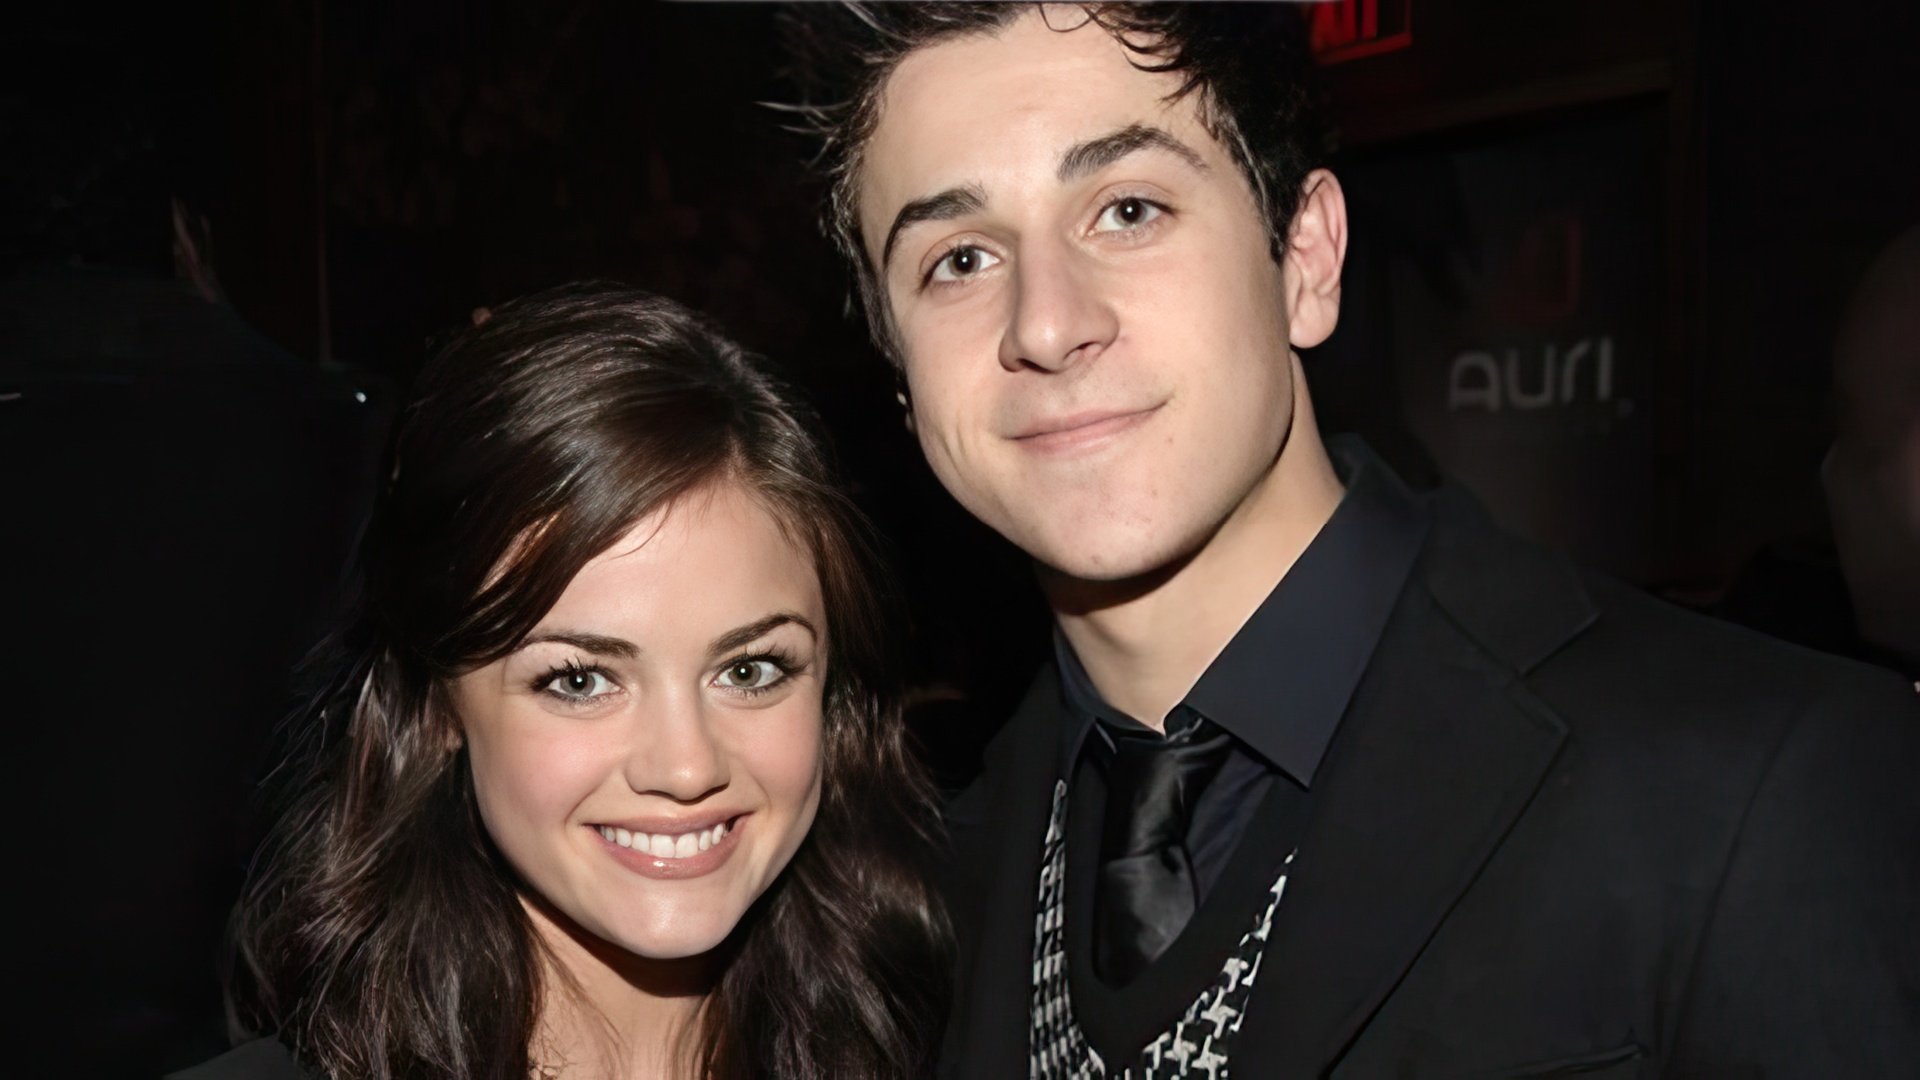 Lucy Hale and David Henrie